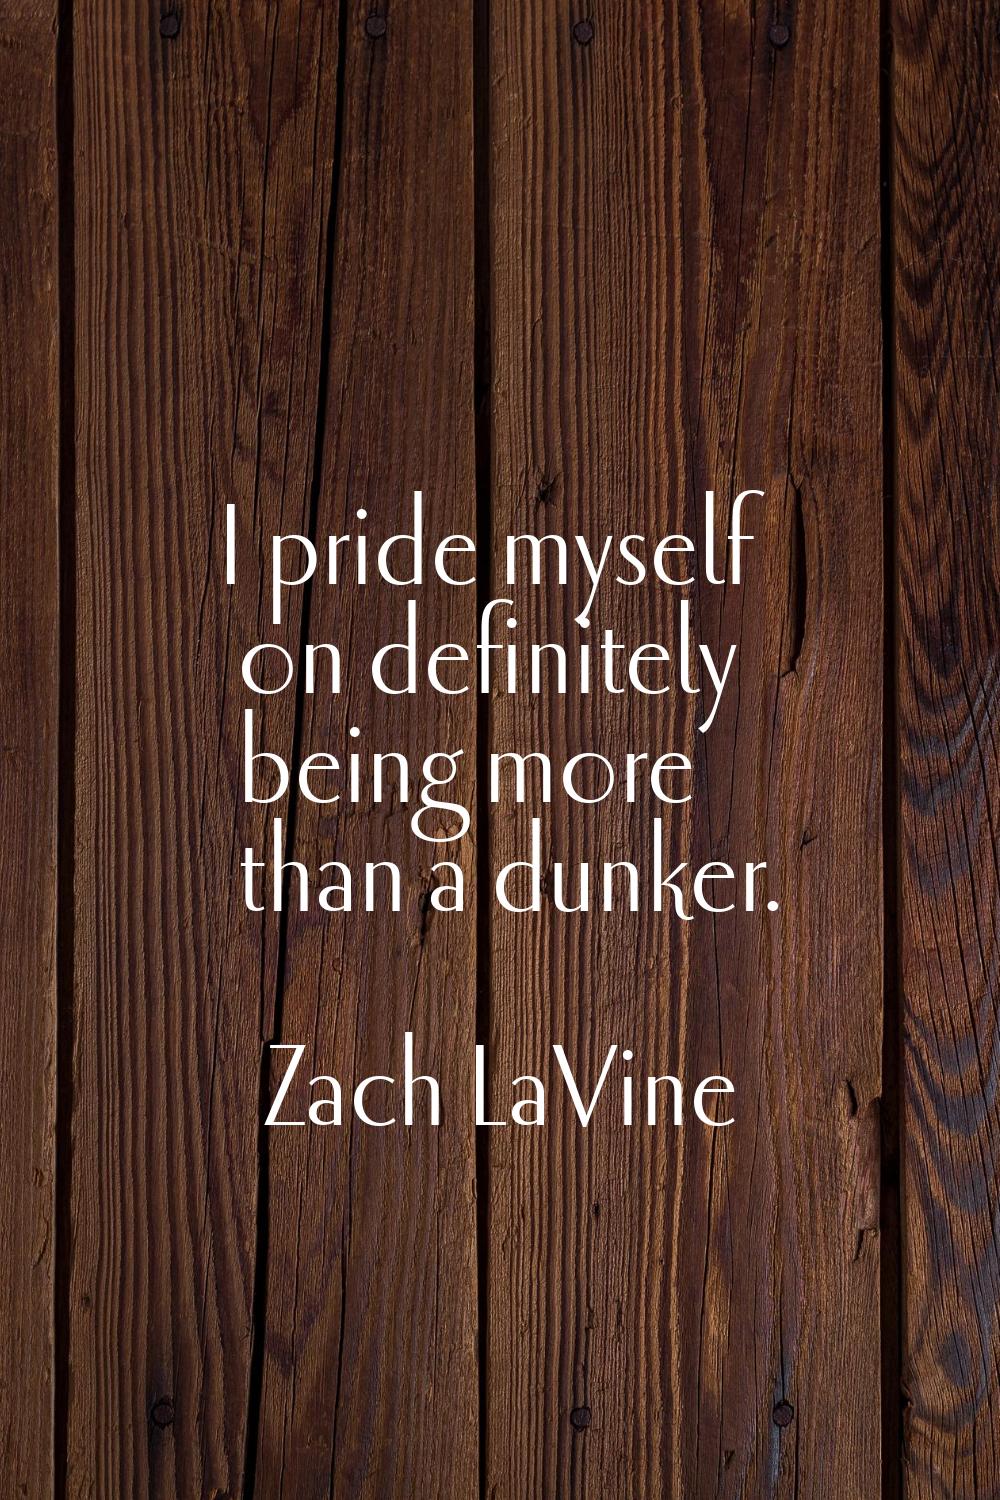 I pride myself on definitely being more than a dunker.